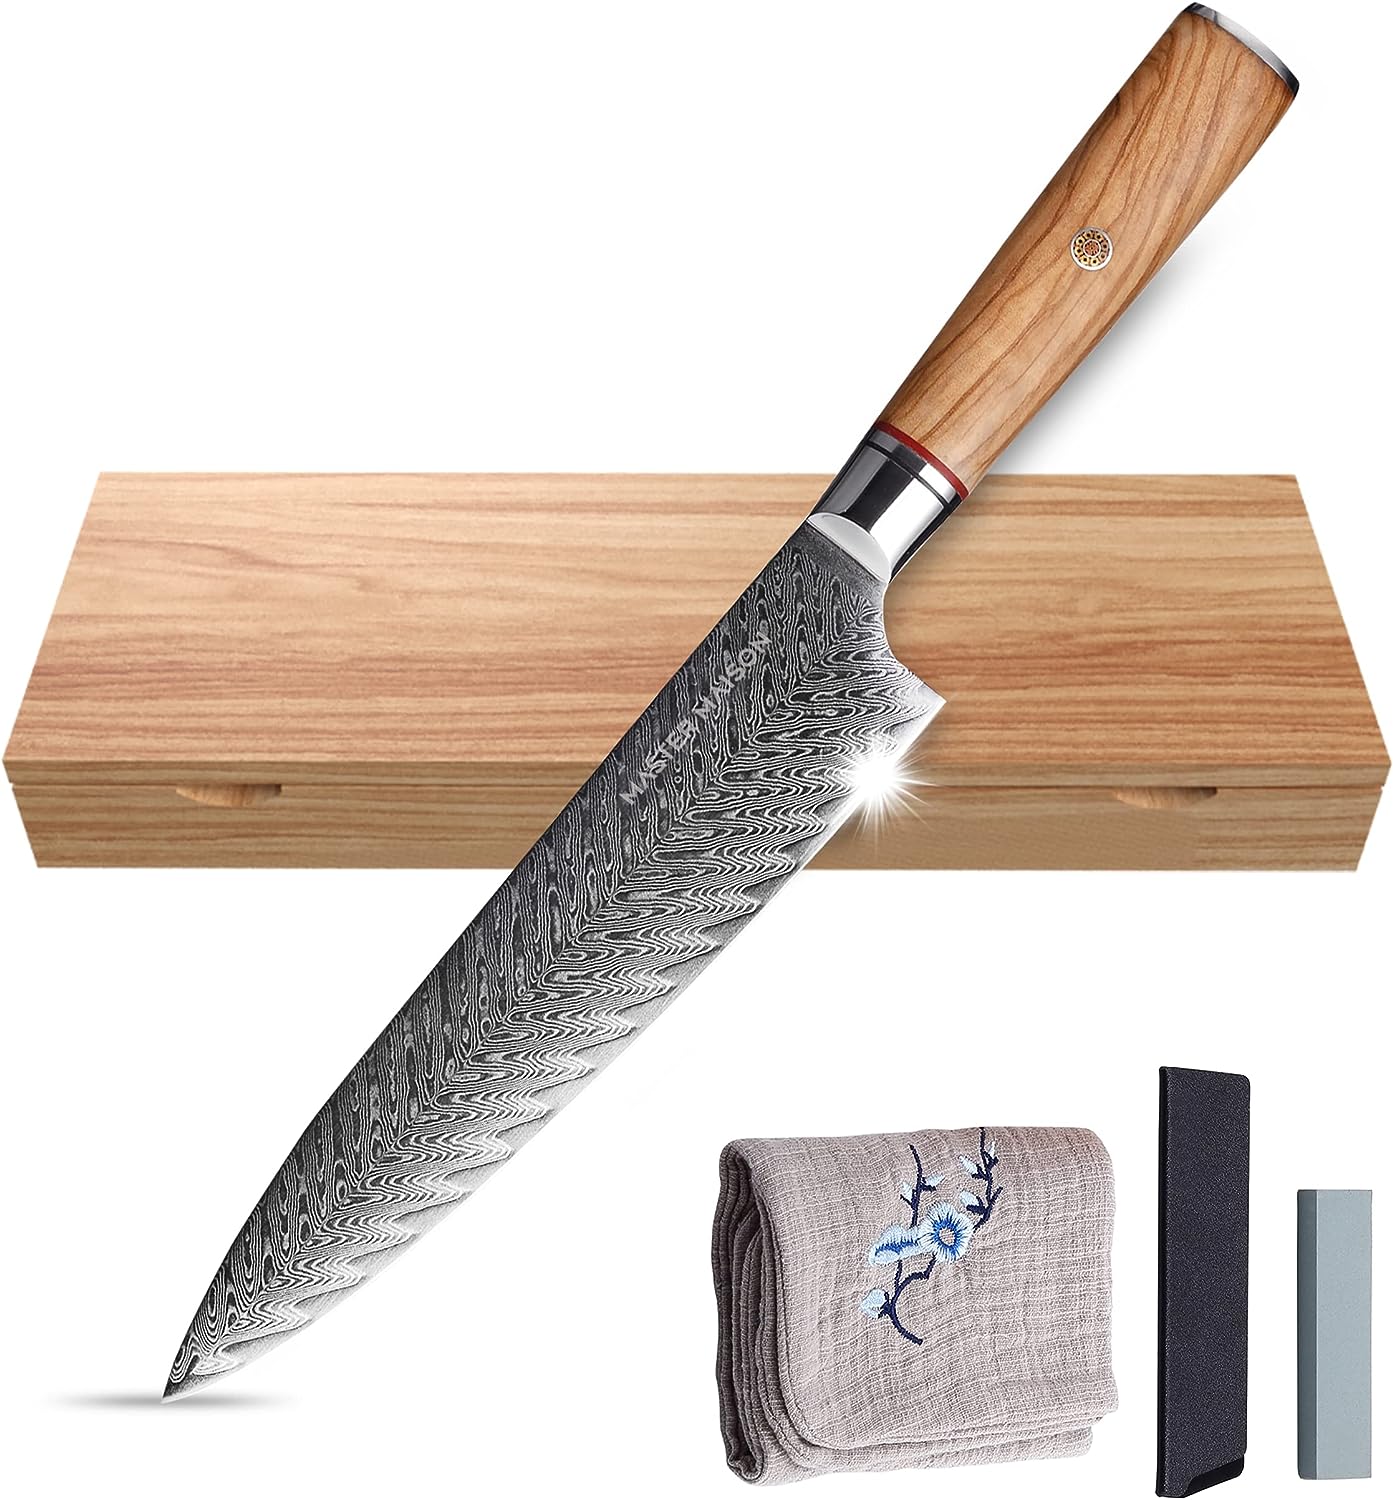 Master Maison Authentic 8 Damascus Steel Chef Knife With Full-Tang Wood Handle, Sheath, Sharpening Stone, Storage Box,  Drying Cloth | AUS-10 Japanese Ultra Sharp Stainless Steel Chefs Knife Set